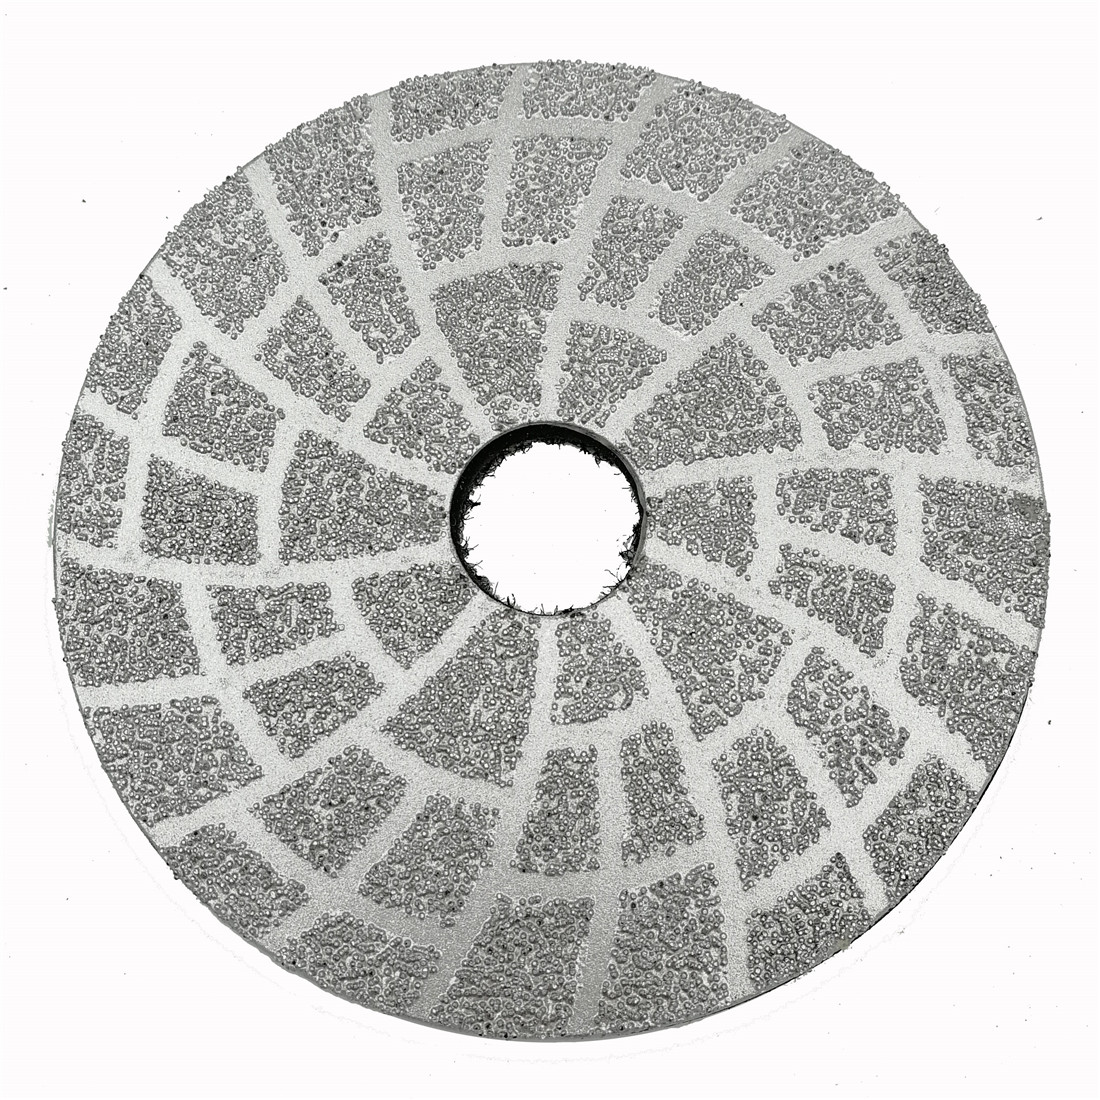 DIATOOL 4" Vacuum Brazed Diamond Grinding Disc Diameter 100mm Dry or Wet Grinding Shaping Or Beveling Smoothing Rough Surfaces